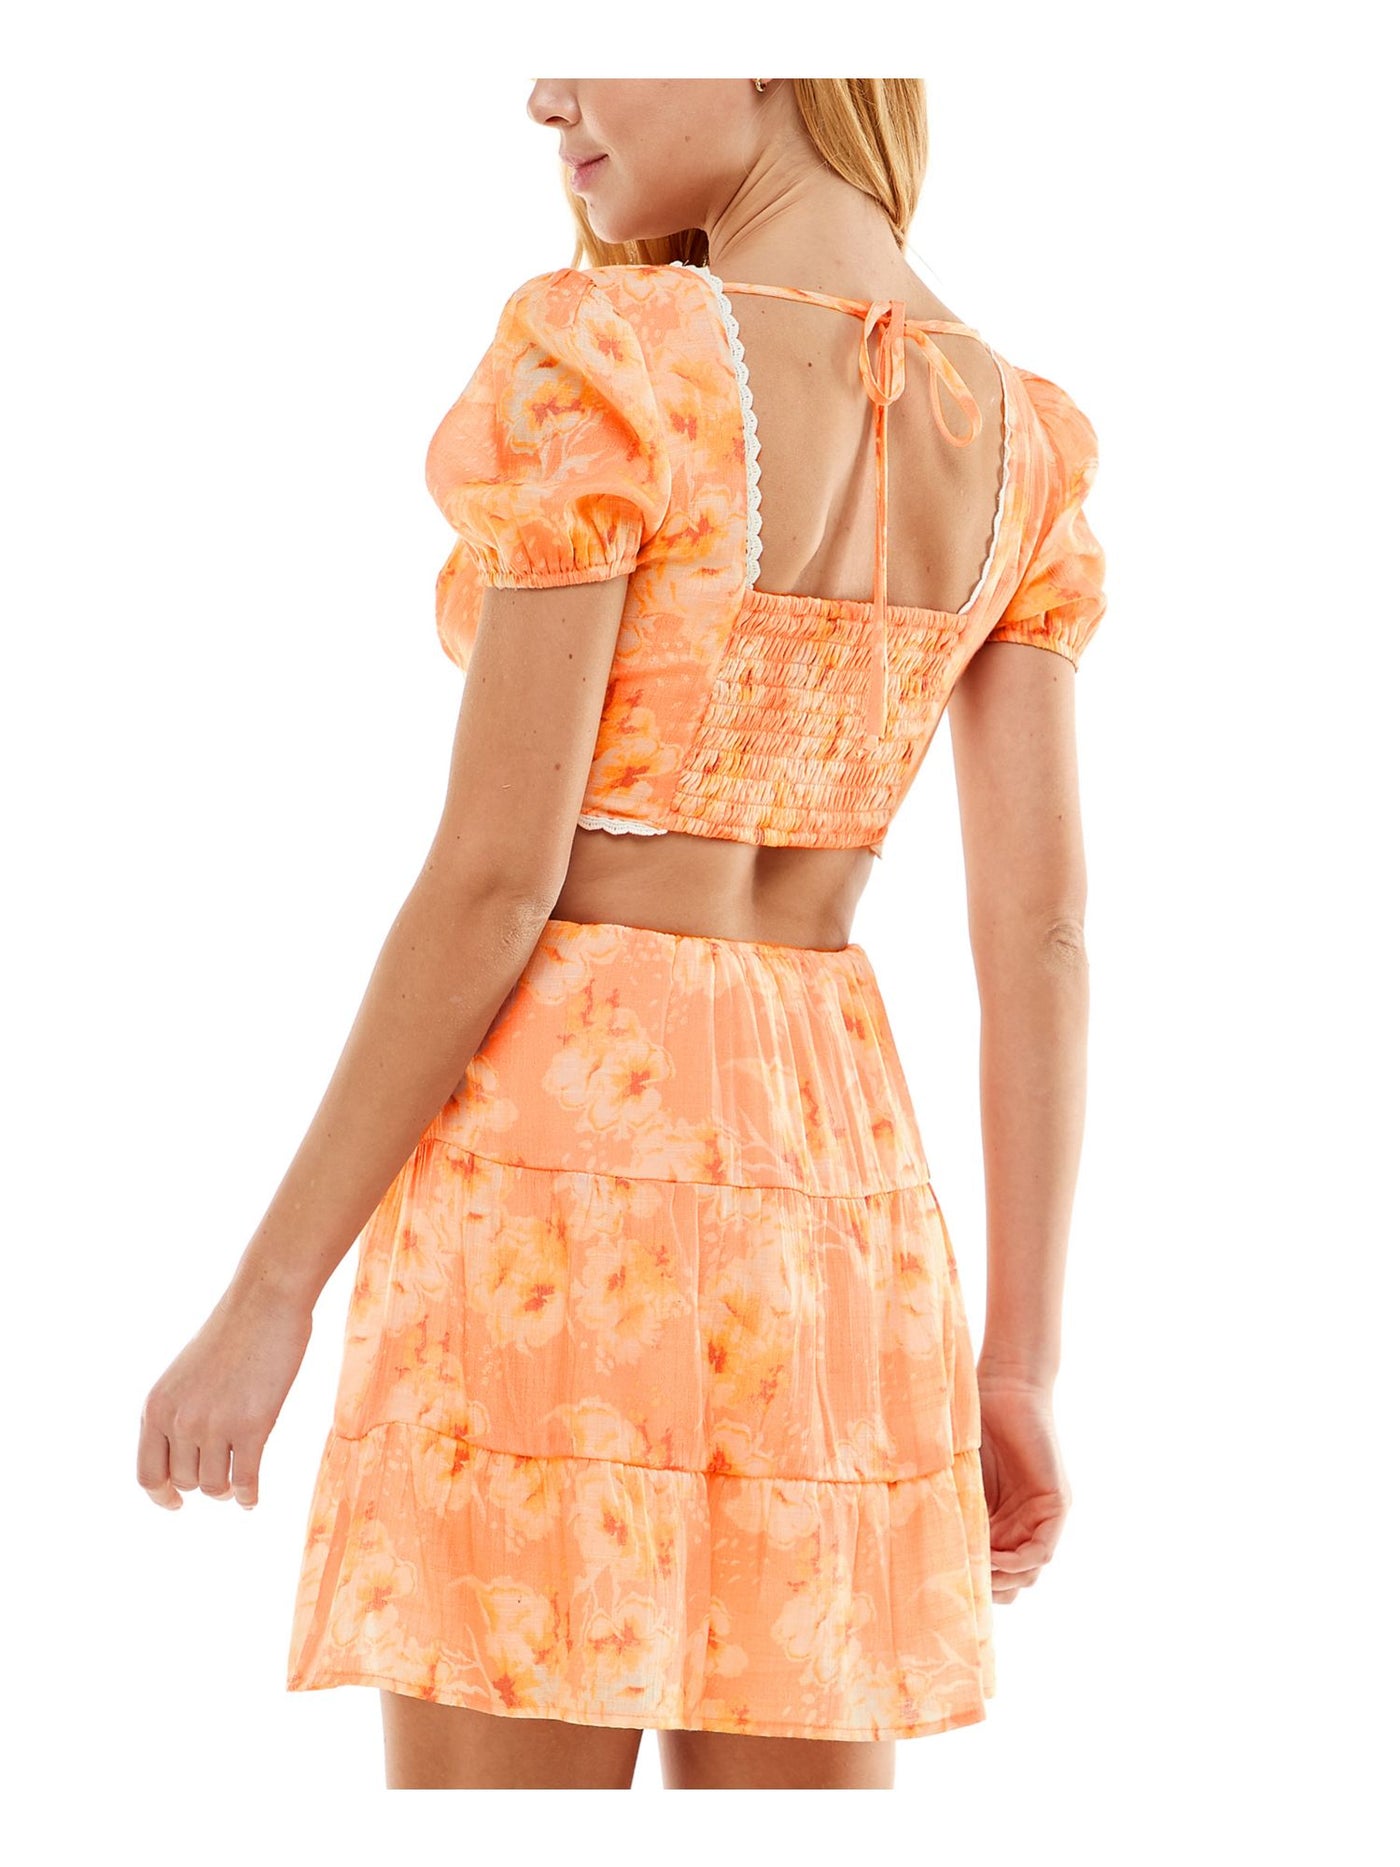 CITY STUDIO Womens Orange Smocked Cut Out Tie Back Lace Trim Tiered Skirt Printed Short Sleeve V Neck Mini Fit + Flare Dress Juniors L